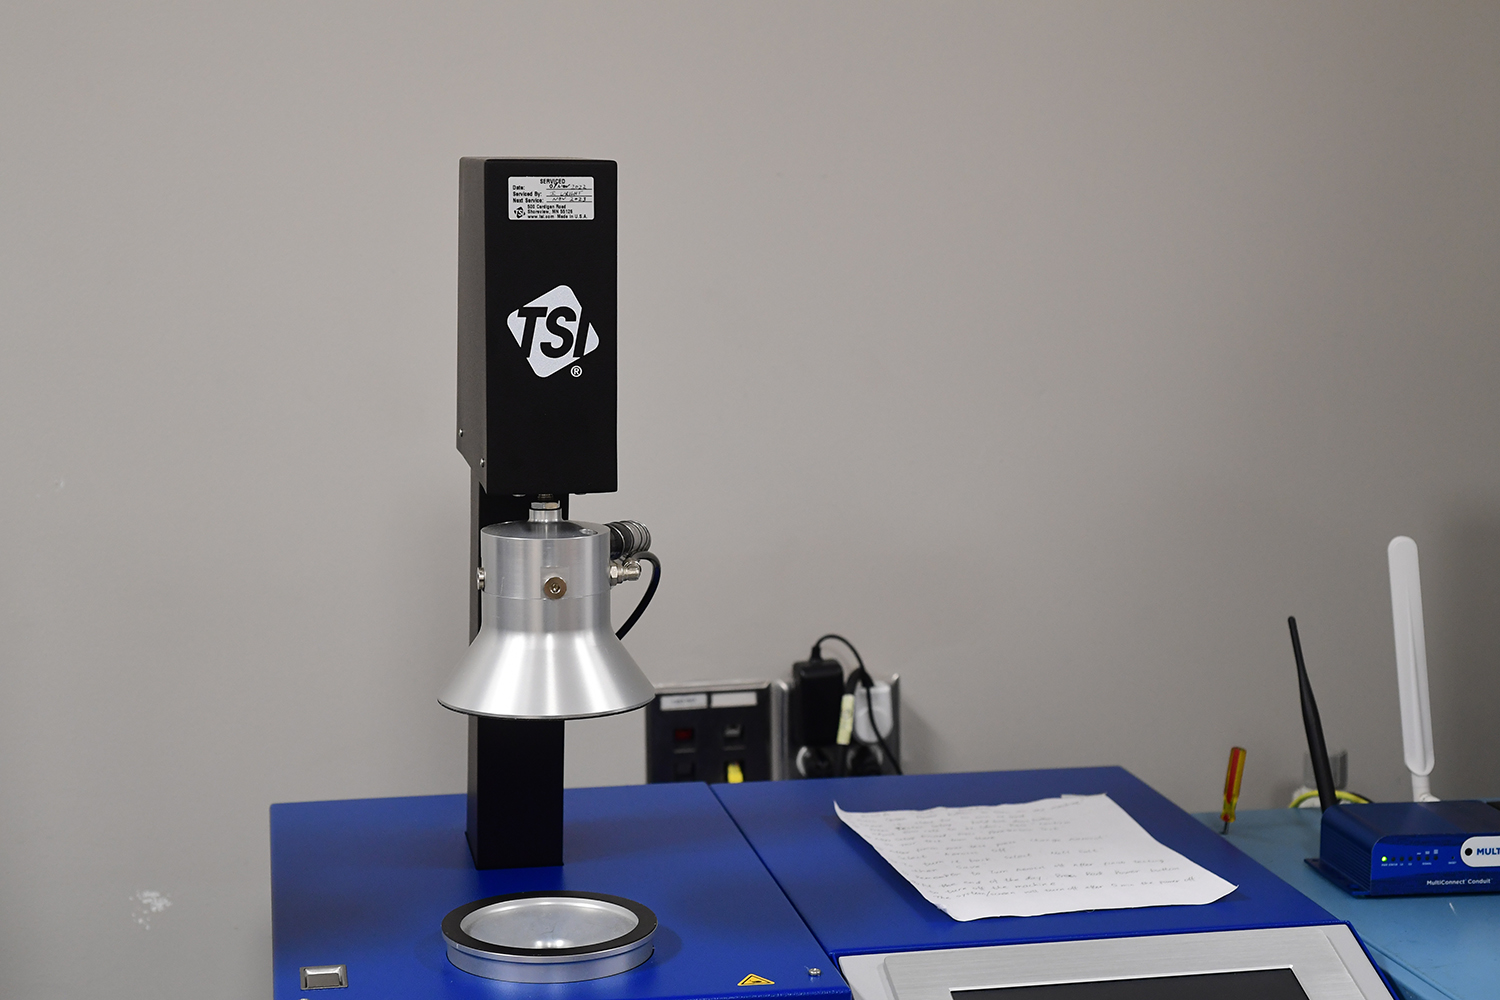 TSI 8130 A filtration efficiency tester at The Nonwovens Institute